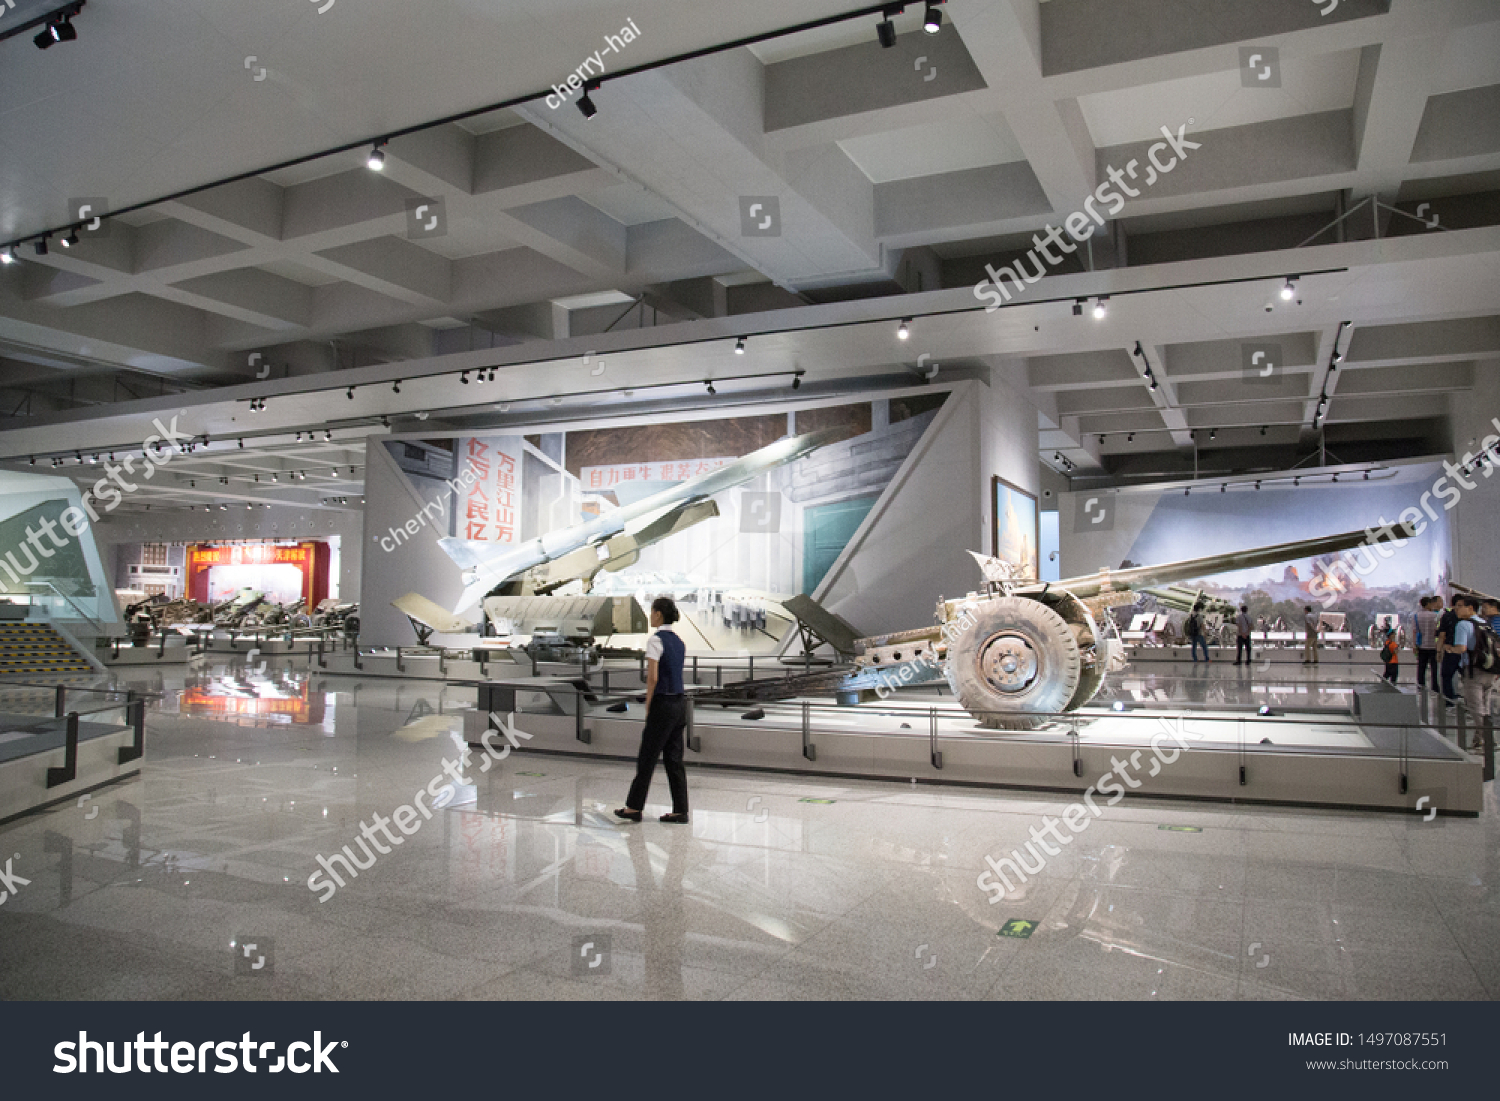 BEIJING, CHINA, JUNE 10, 2018: interior of Military Museum of the Chinese People's Revolution #1497087551